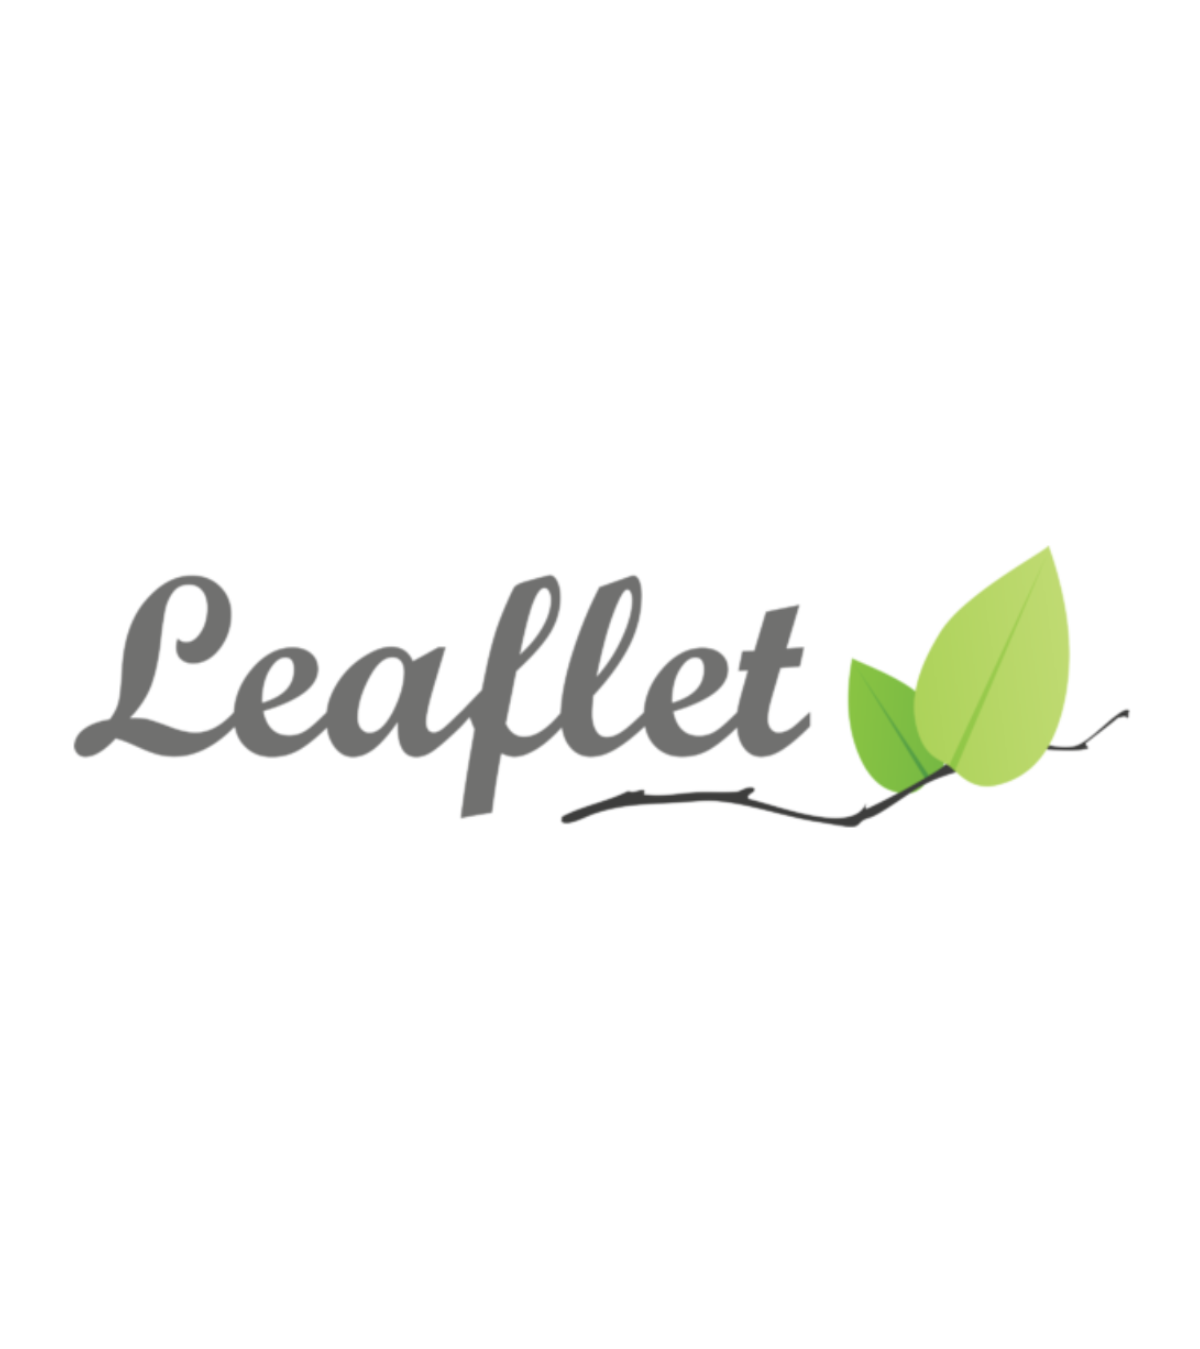 code examples and answer to questions in Leaflet framework in JavaScript